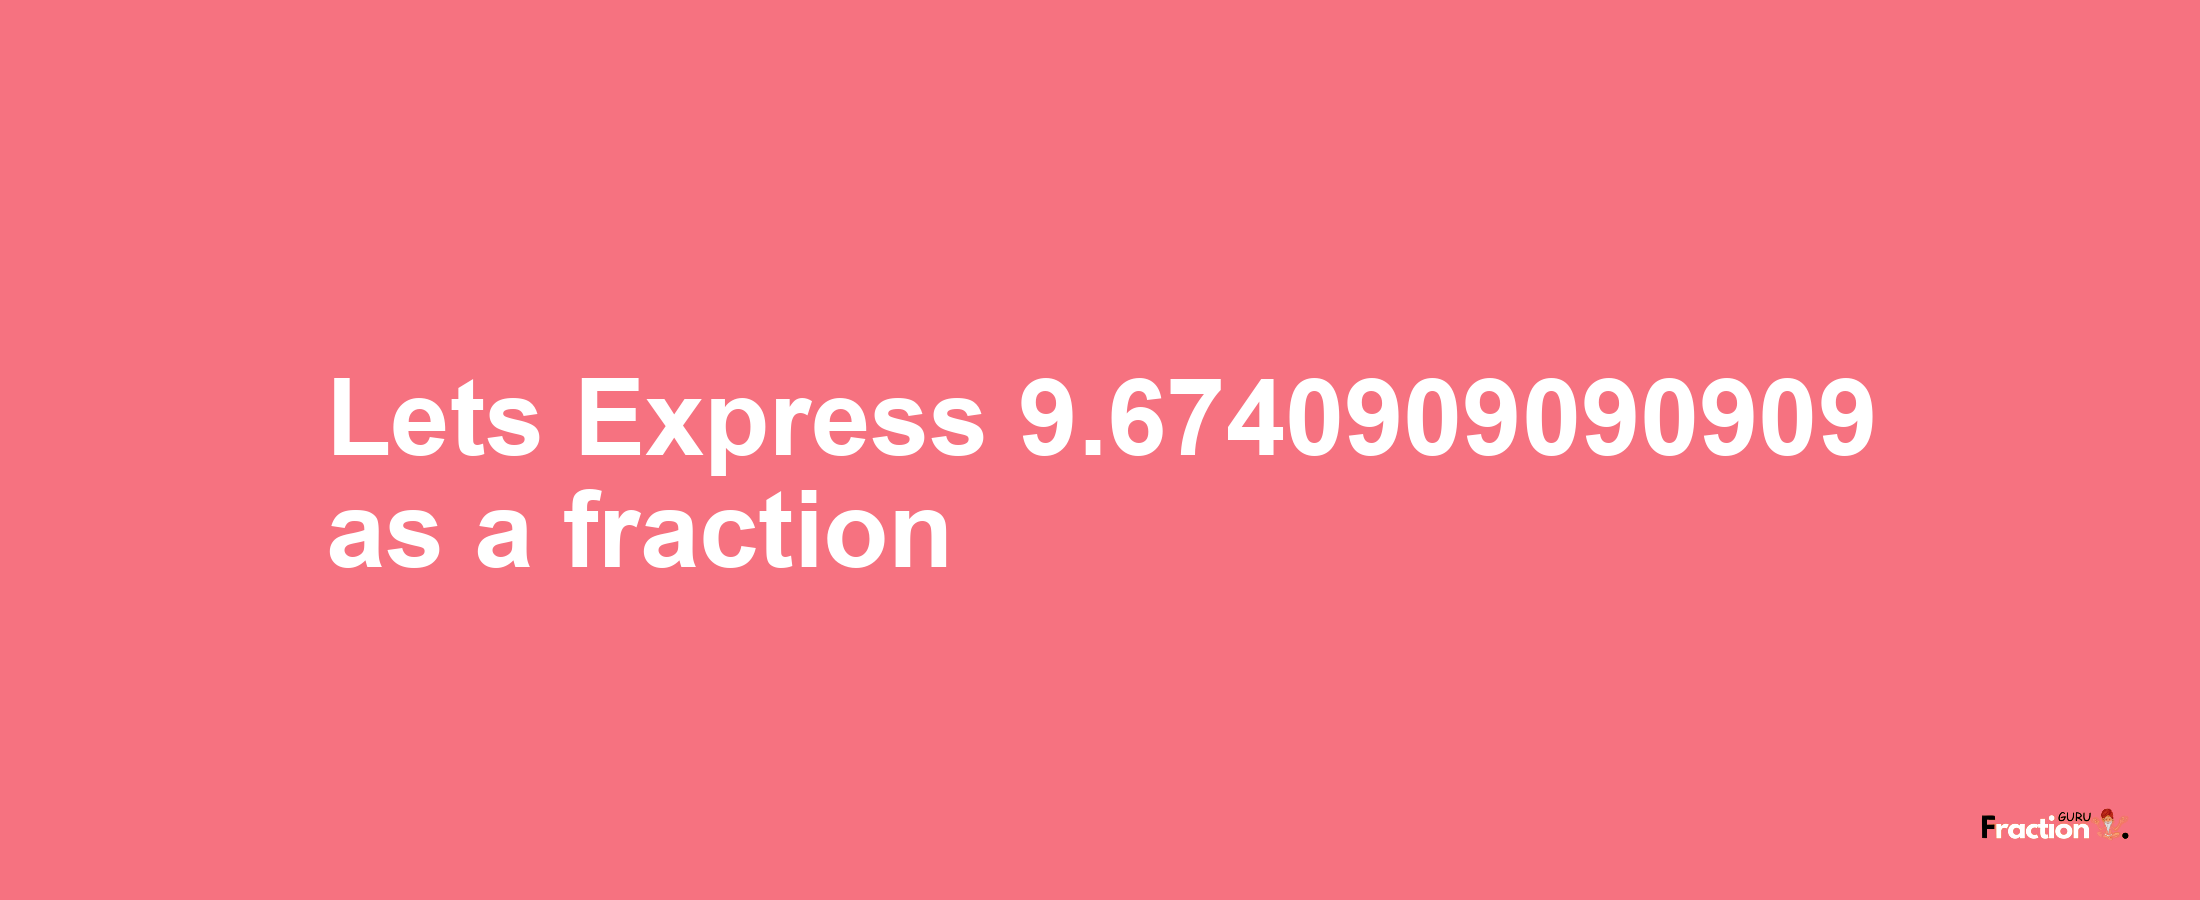 Lets Express 9.6740909090909 as afraction